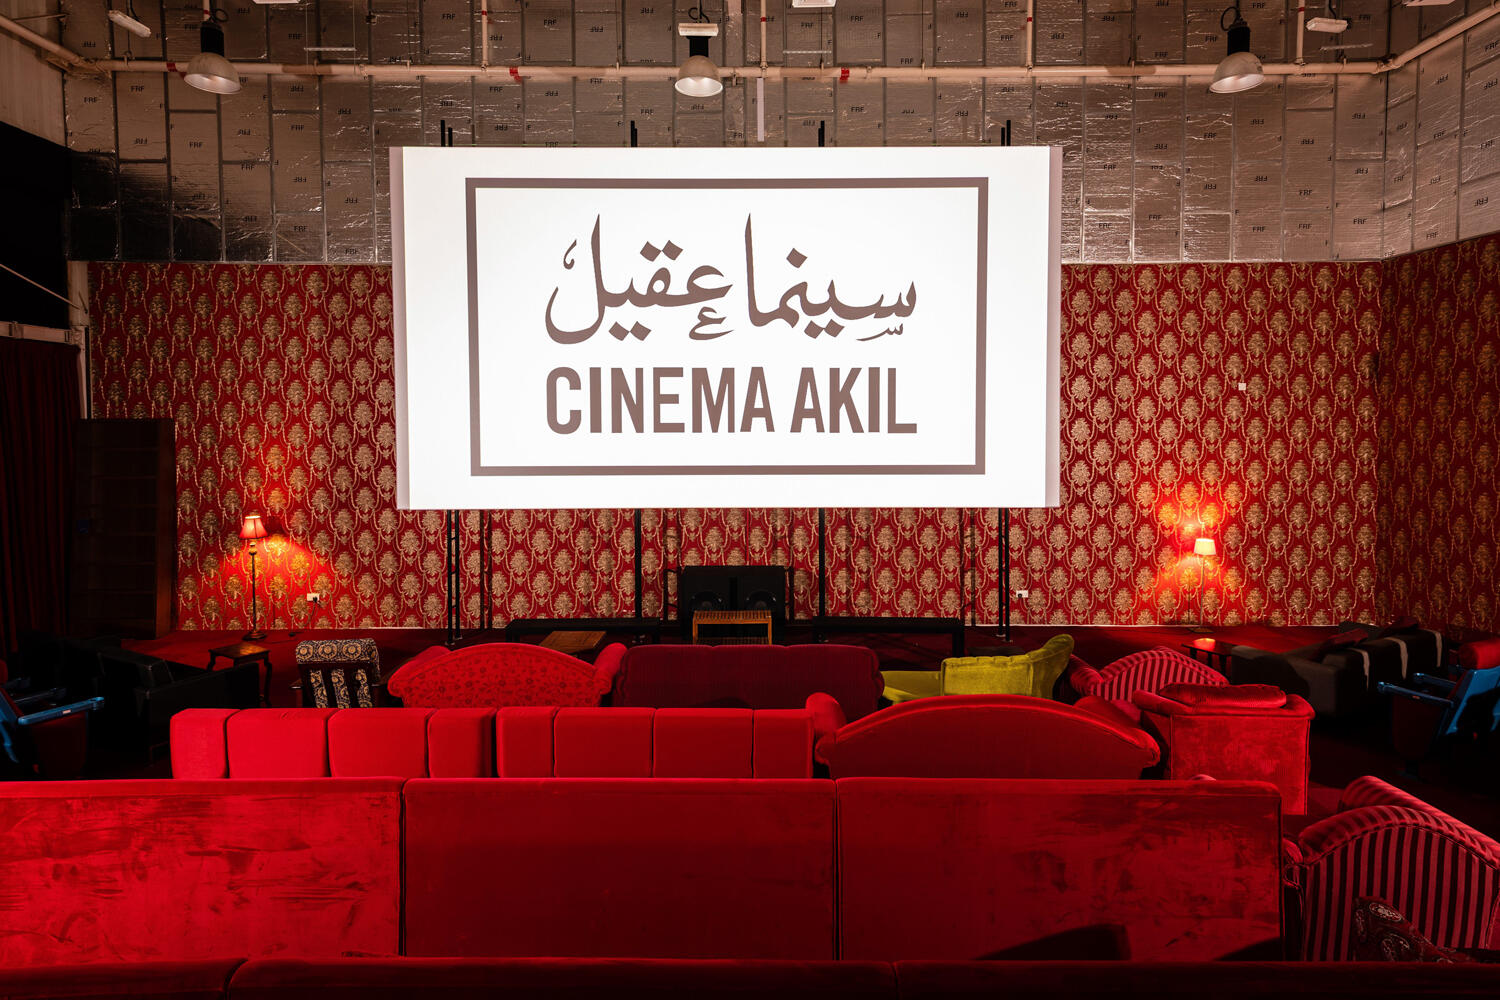 Cinema for the People: The Inclusive Approach of Cinema Akil